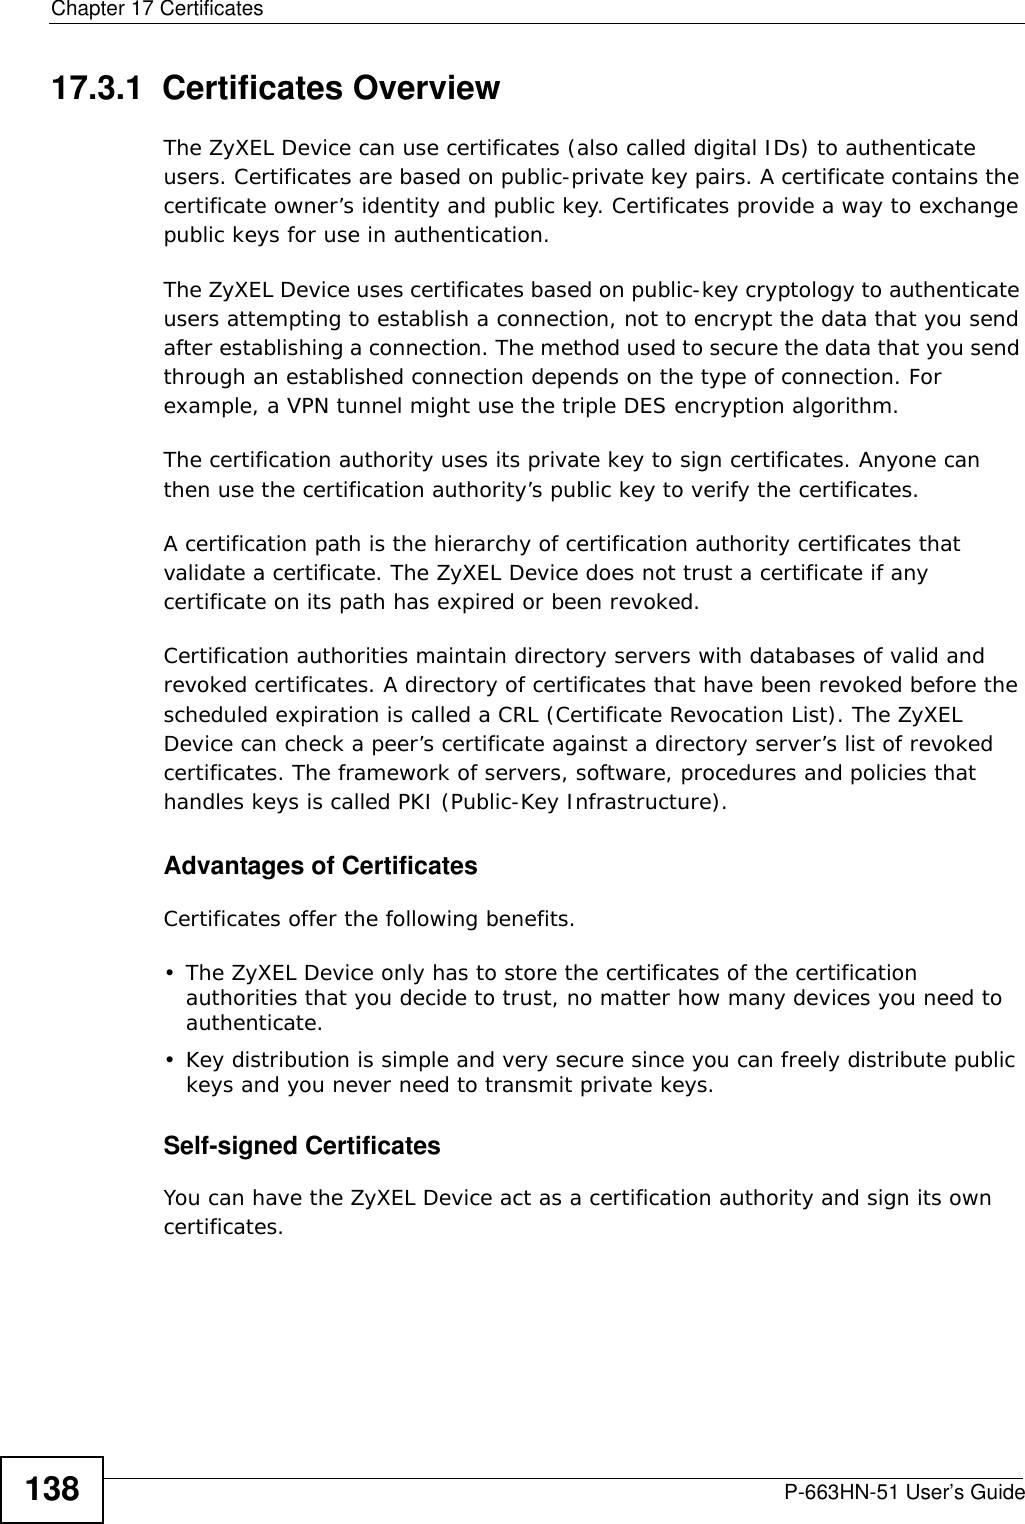 Chapter 17 CertificatesP-663HN-51 User’s Guide13817.3.1  Certificates OverviewThe ZyXEL Device can use certificates (also called digital IDs) to authenticate users. Certificates are based on public-private key pairs. A certificate contains the certificate owner’s identity and public key. Certificates provide a way to exchange public keys for use in authentication. The ZyXEL Device uses certificates based on public-key cryptology to authenticate users attempting to establish a connection, not to encrypt the data that you send after establishing a connection. The method used to secure the data that you send through an established connection depends on the type of connection. For example, a VPN tunnel might use the triple DES encryption algorithm.The certification authority uses its private key to sign certificates. Anyone can then use the certification authority’s public key to verify the certificates.A certification path is the hierarchy of certification authority certificates that validate a certificate. The ZyXEL Device does not trust a certificate if any certificate on its path has expired or been revoked. Certification authorities maintain directory servers with databases of valid and revoked certificates. A directory of certificates that have been revoked before the scheduled expiration is called a CRL (Certificate Revocation List). The ZyXEL Device can check a peer’s certificate against a directory server’s list of revoked certificates. The framework of servers, software, procedures and policies that handles keys is called PKI (Public-Key Infrastructure).Advantages of CertificatesCertificates offer the following benefits.• The ZyXEL Device only has to store the certificates of the certification authorities that you decide to trust, no matter how many devices you need to authenticate. • Key distribution is simple and very secure since you can freely distribute public keys and you never need to transmit private keys.Self-signed CertificatesYou can have the ZyXEL Device act as a certification authority and sign its own certificates.